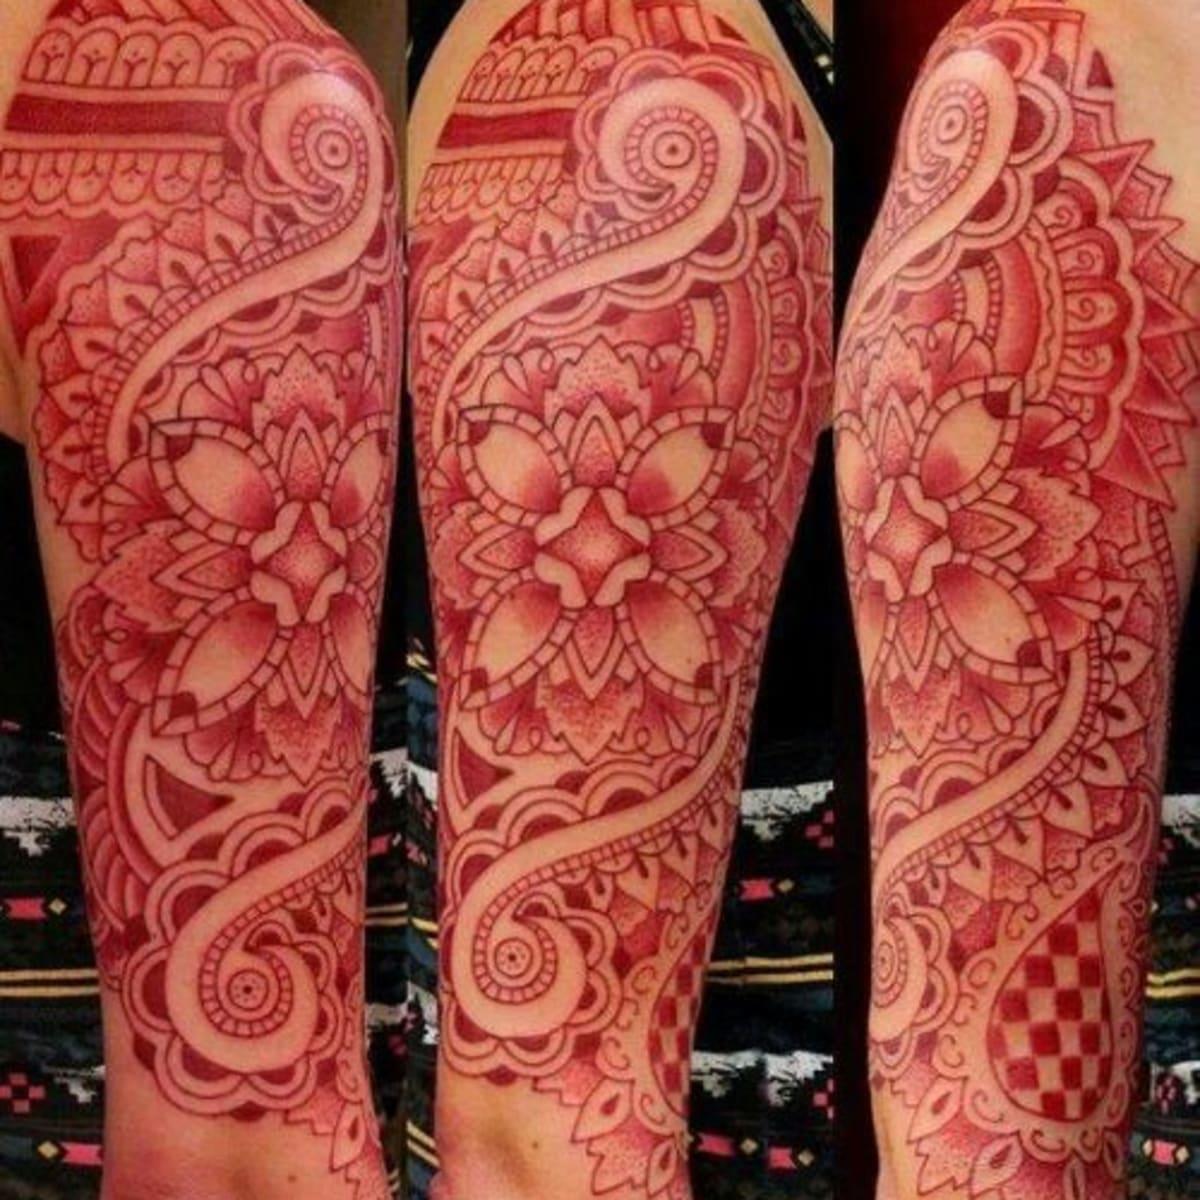 Red Ink Tattoos - Tattoo Ideas, Artists and Models